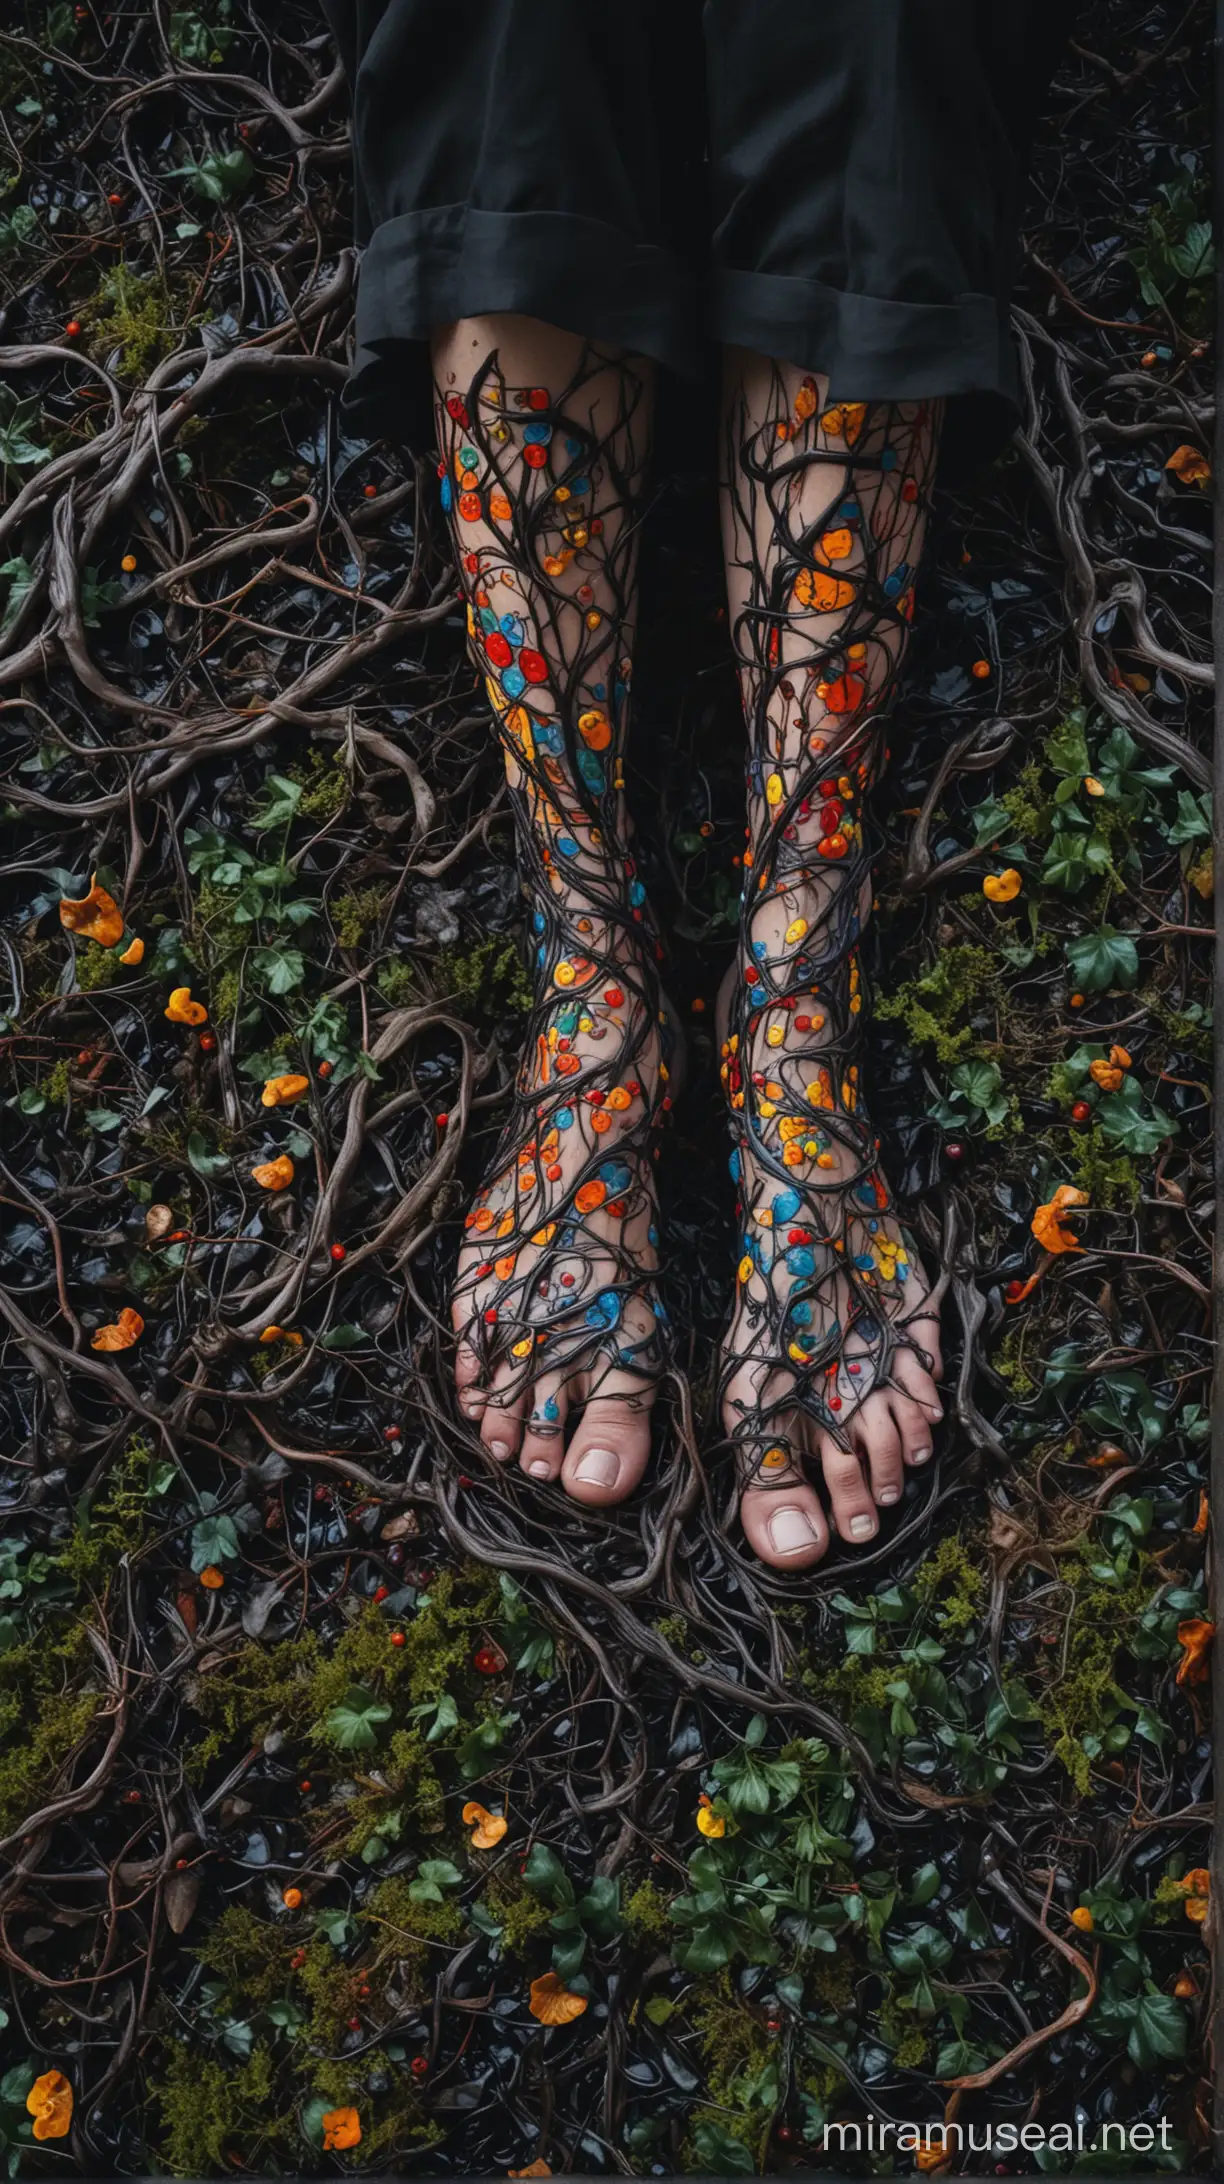 Surreal Foot Fungus Art Colorful Swirling Patterns with Twisted Vines